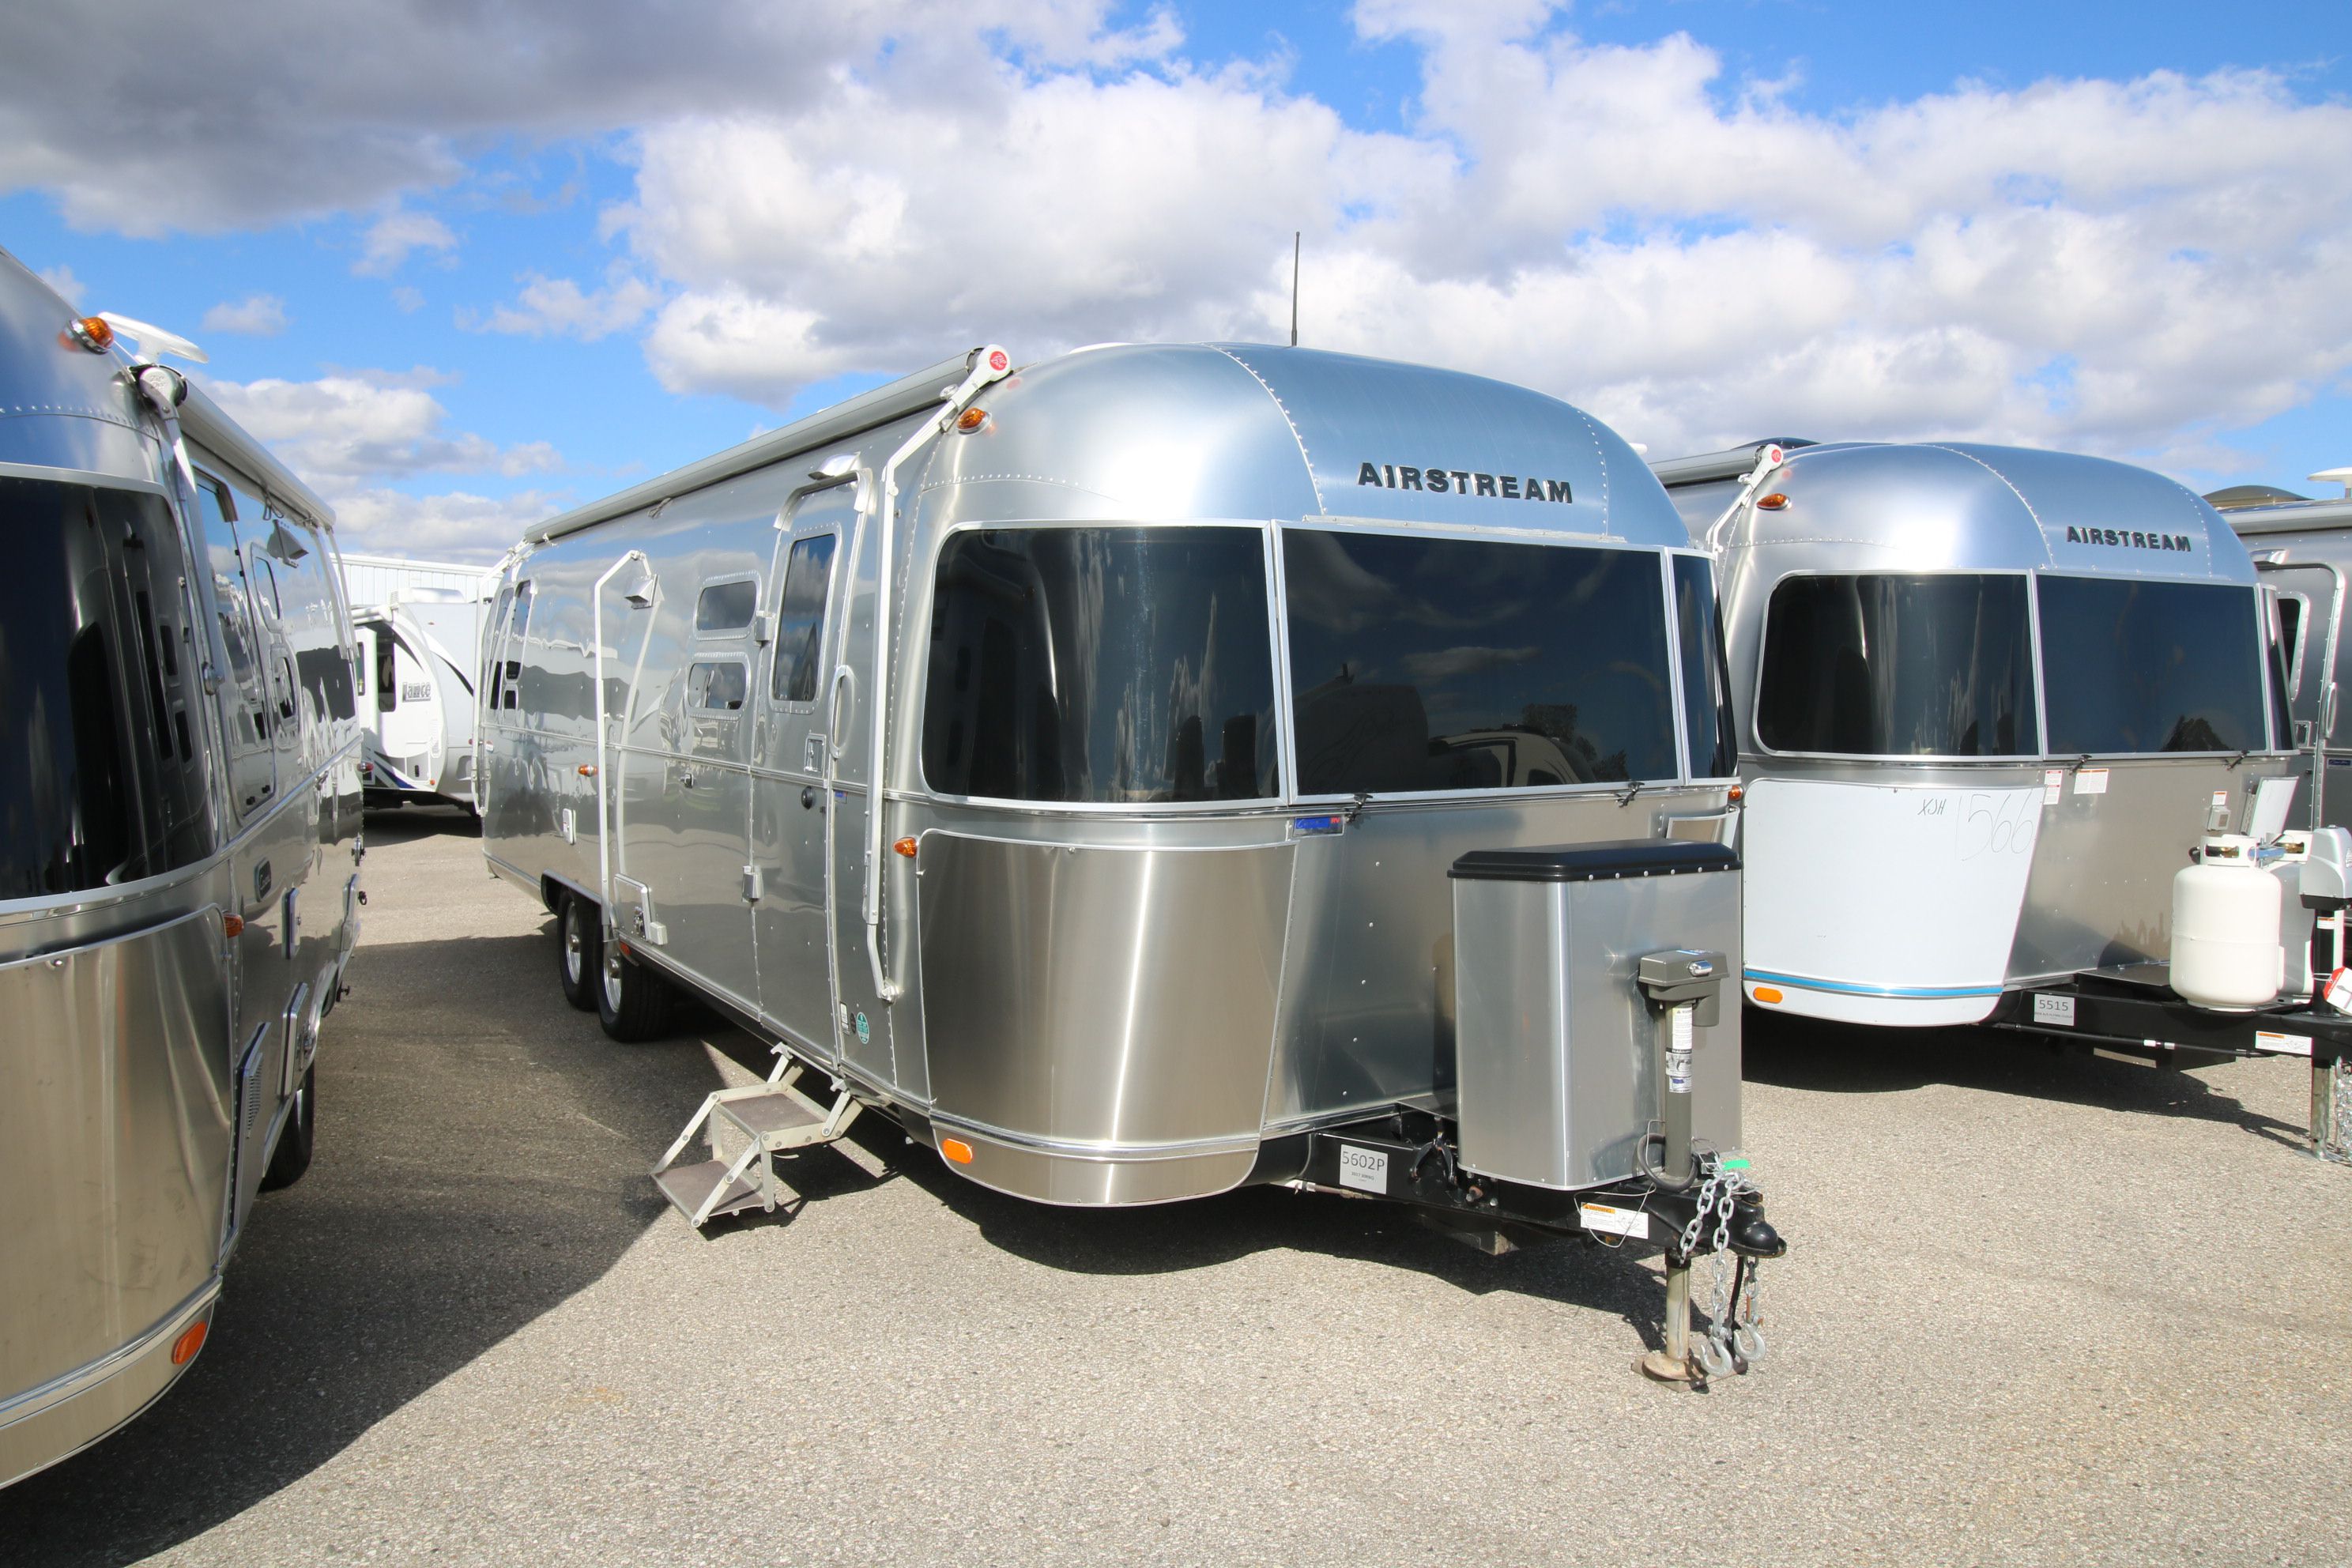 14 ft travel trailers for sale in ontario